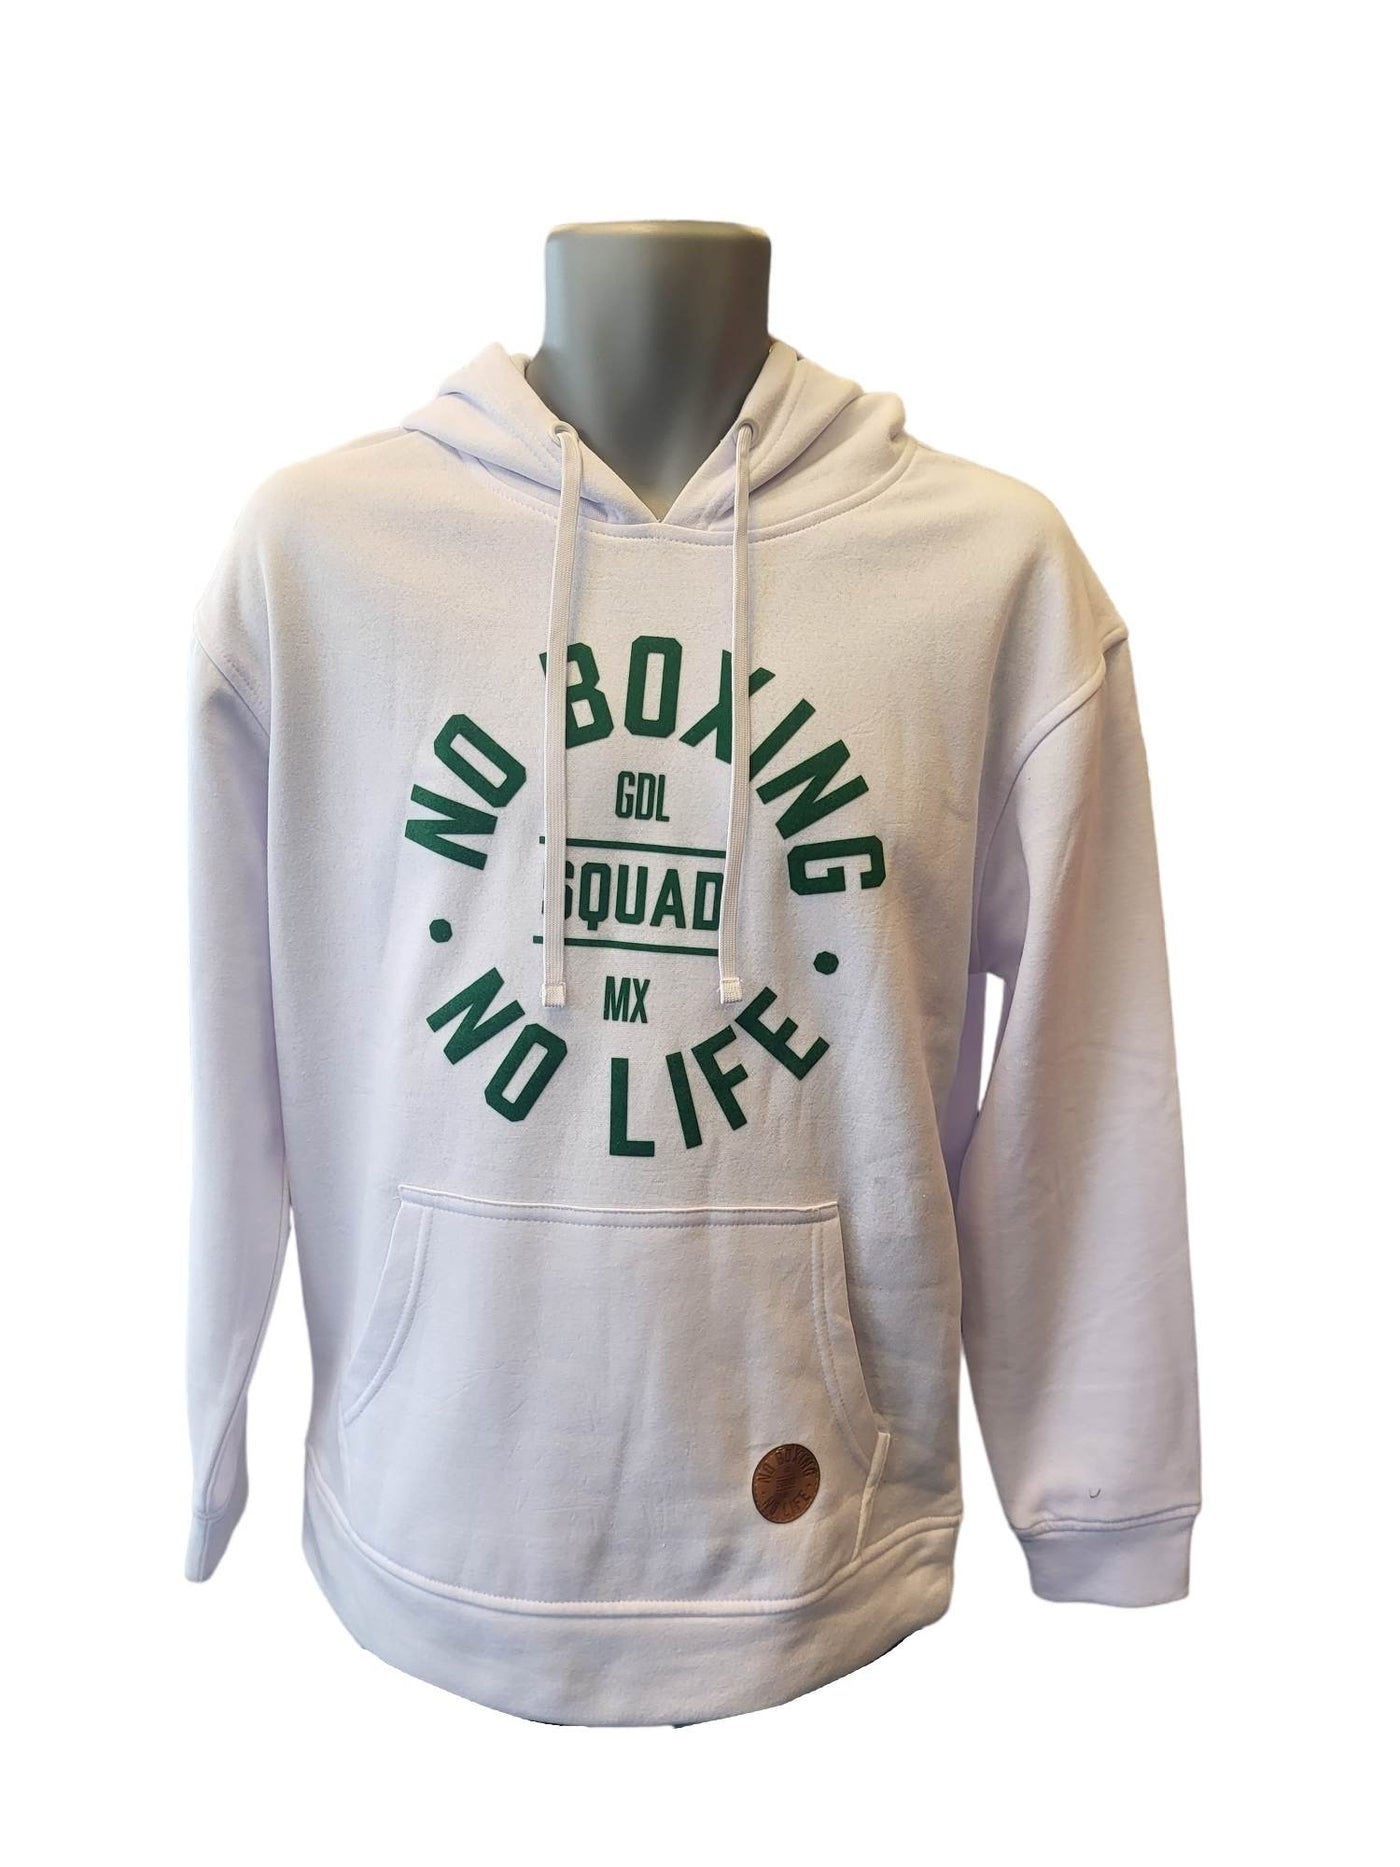 Official No Boxing No Life GDL MX SQUAD Hoodie - White/ Green